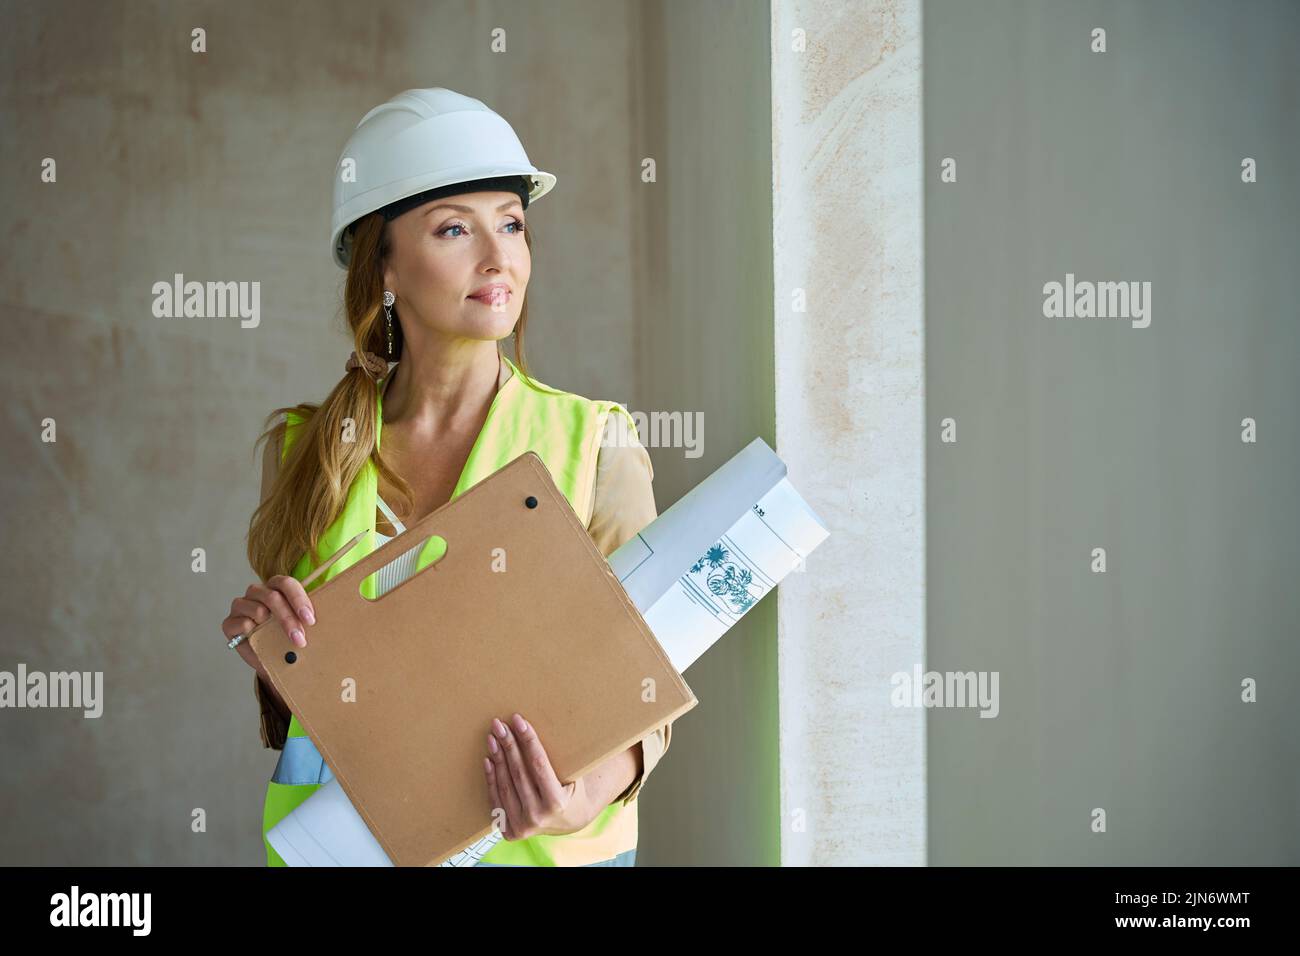 Woman realtor with folders and project stands in unfinished house Stock Photo